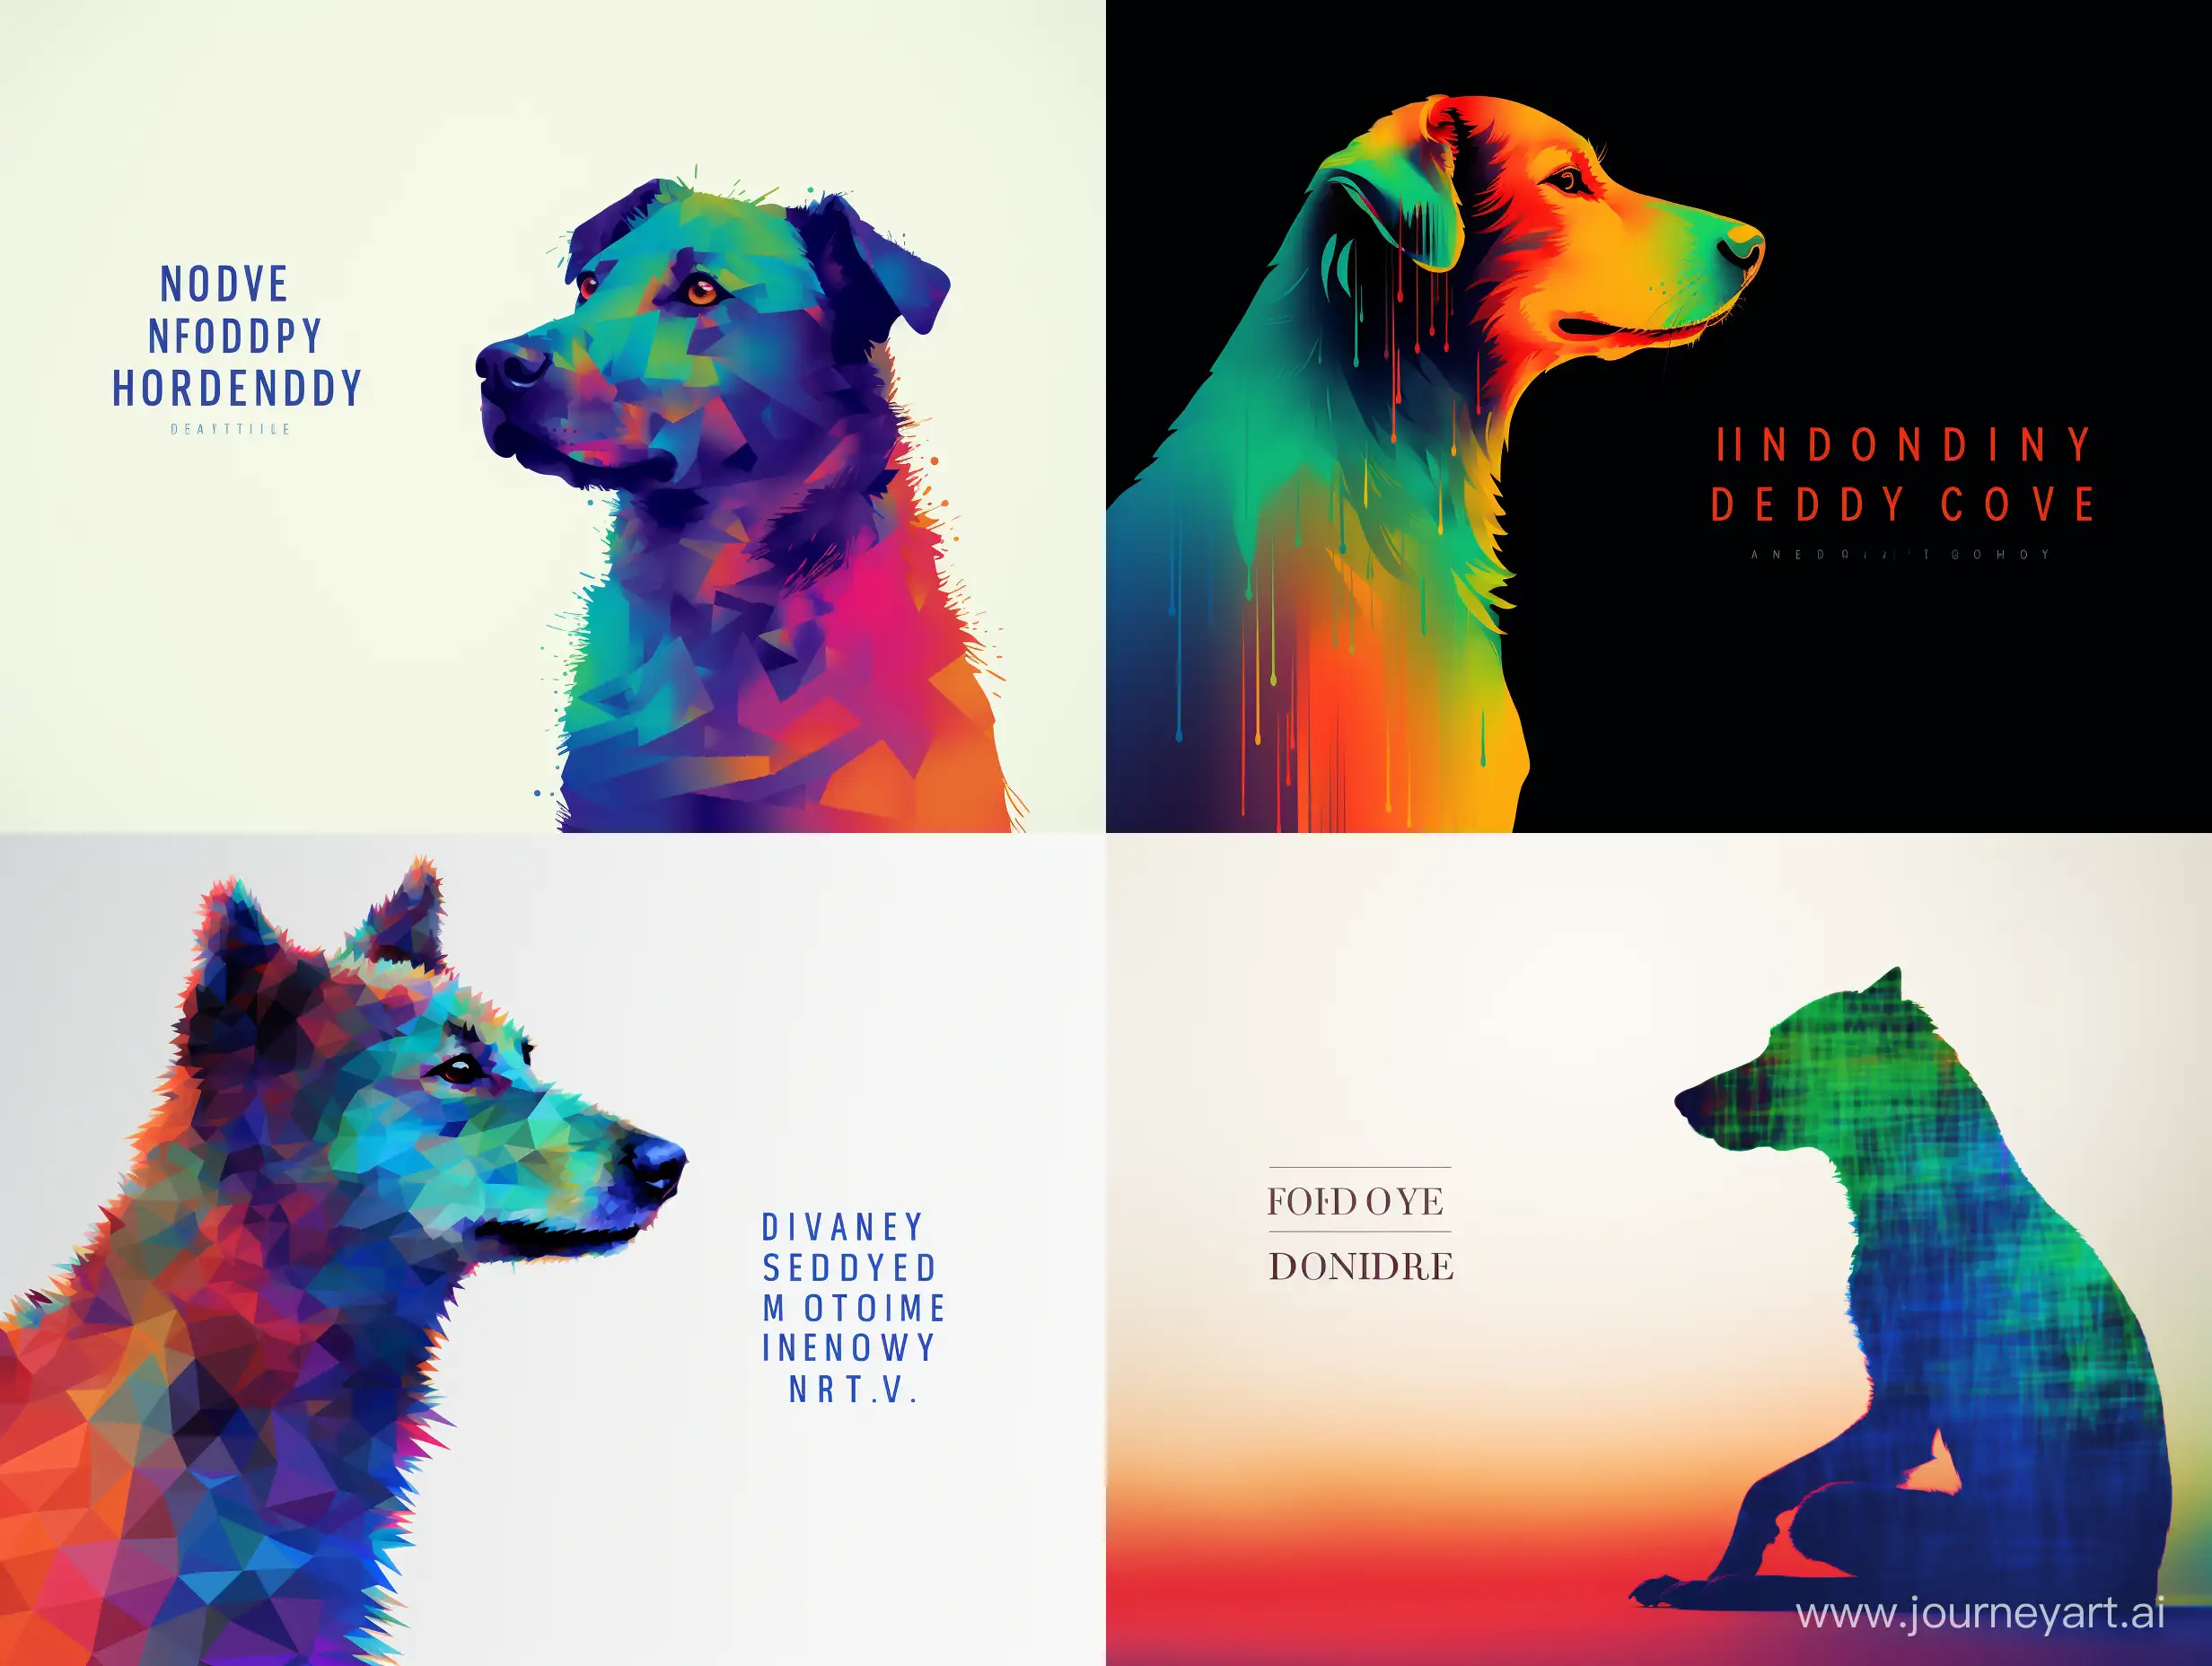 Design a colorful, minimalist image representing internet anonymity. Include a subtle dog silhouette with a digital device backdrop, incorporating pixels or binary code elements. Use a modern font for the quote "On the Internet, nobody knows you're a dog."